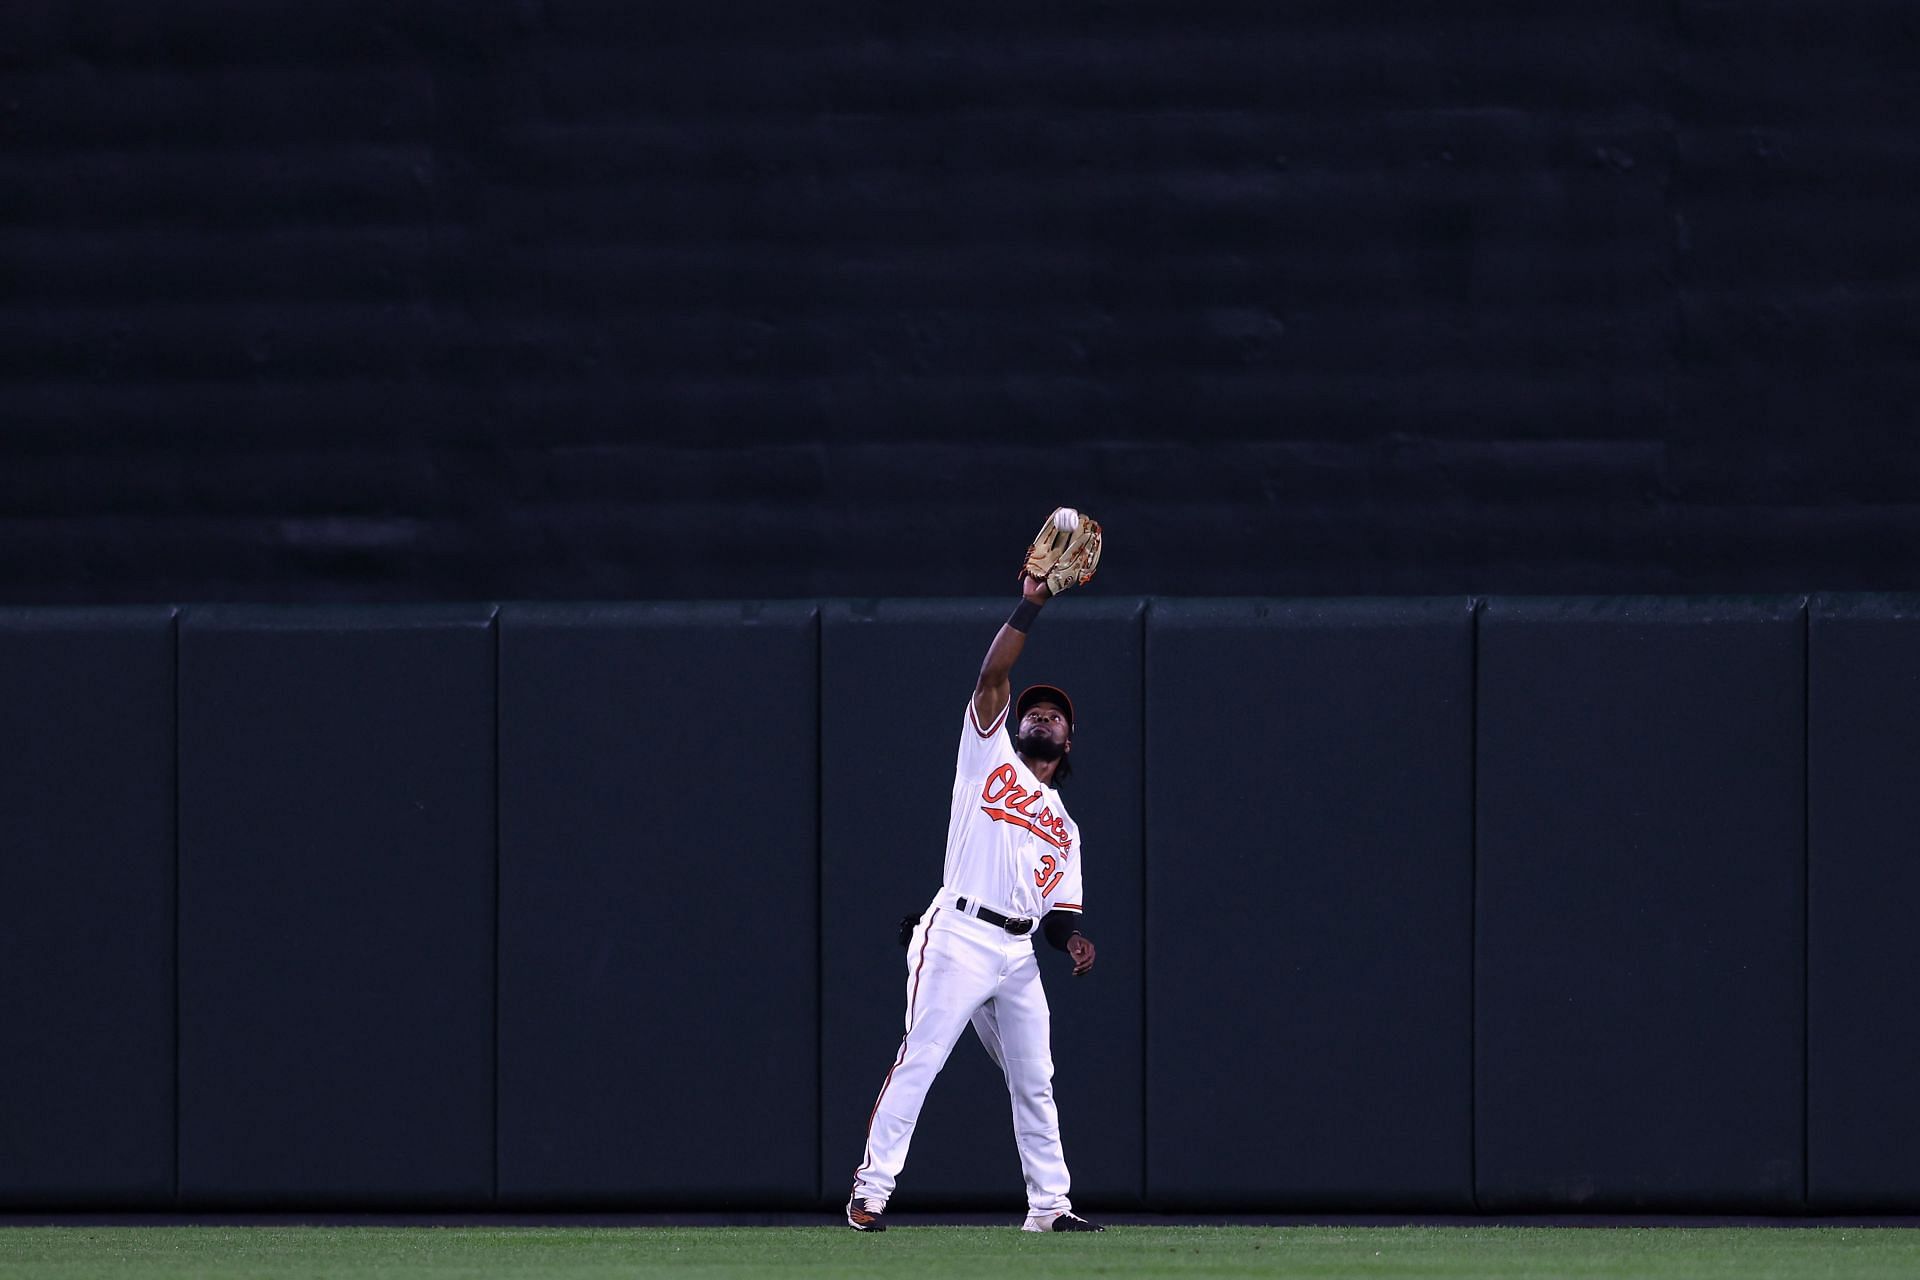 Cedric Mullins makes a catch during a Baltimore Orioles v Chicago Cubs game.